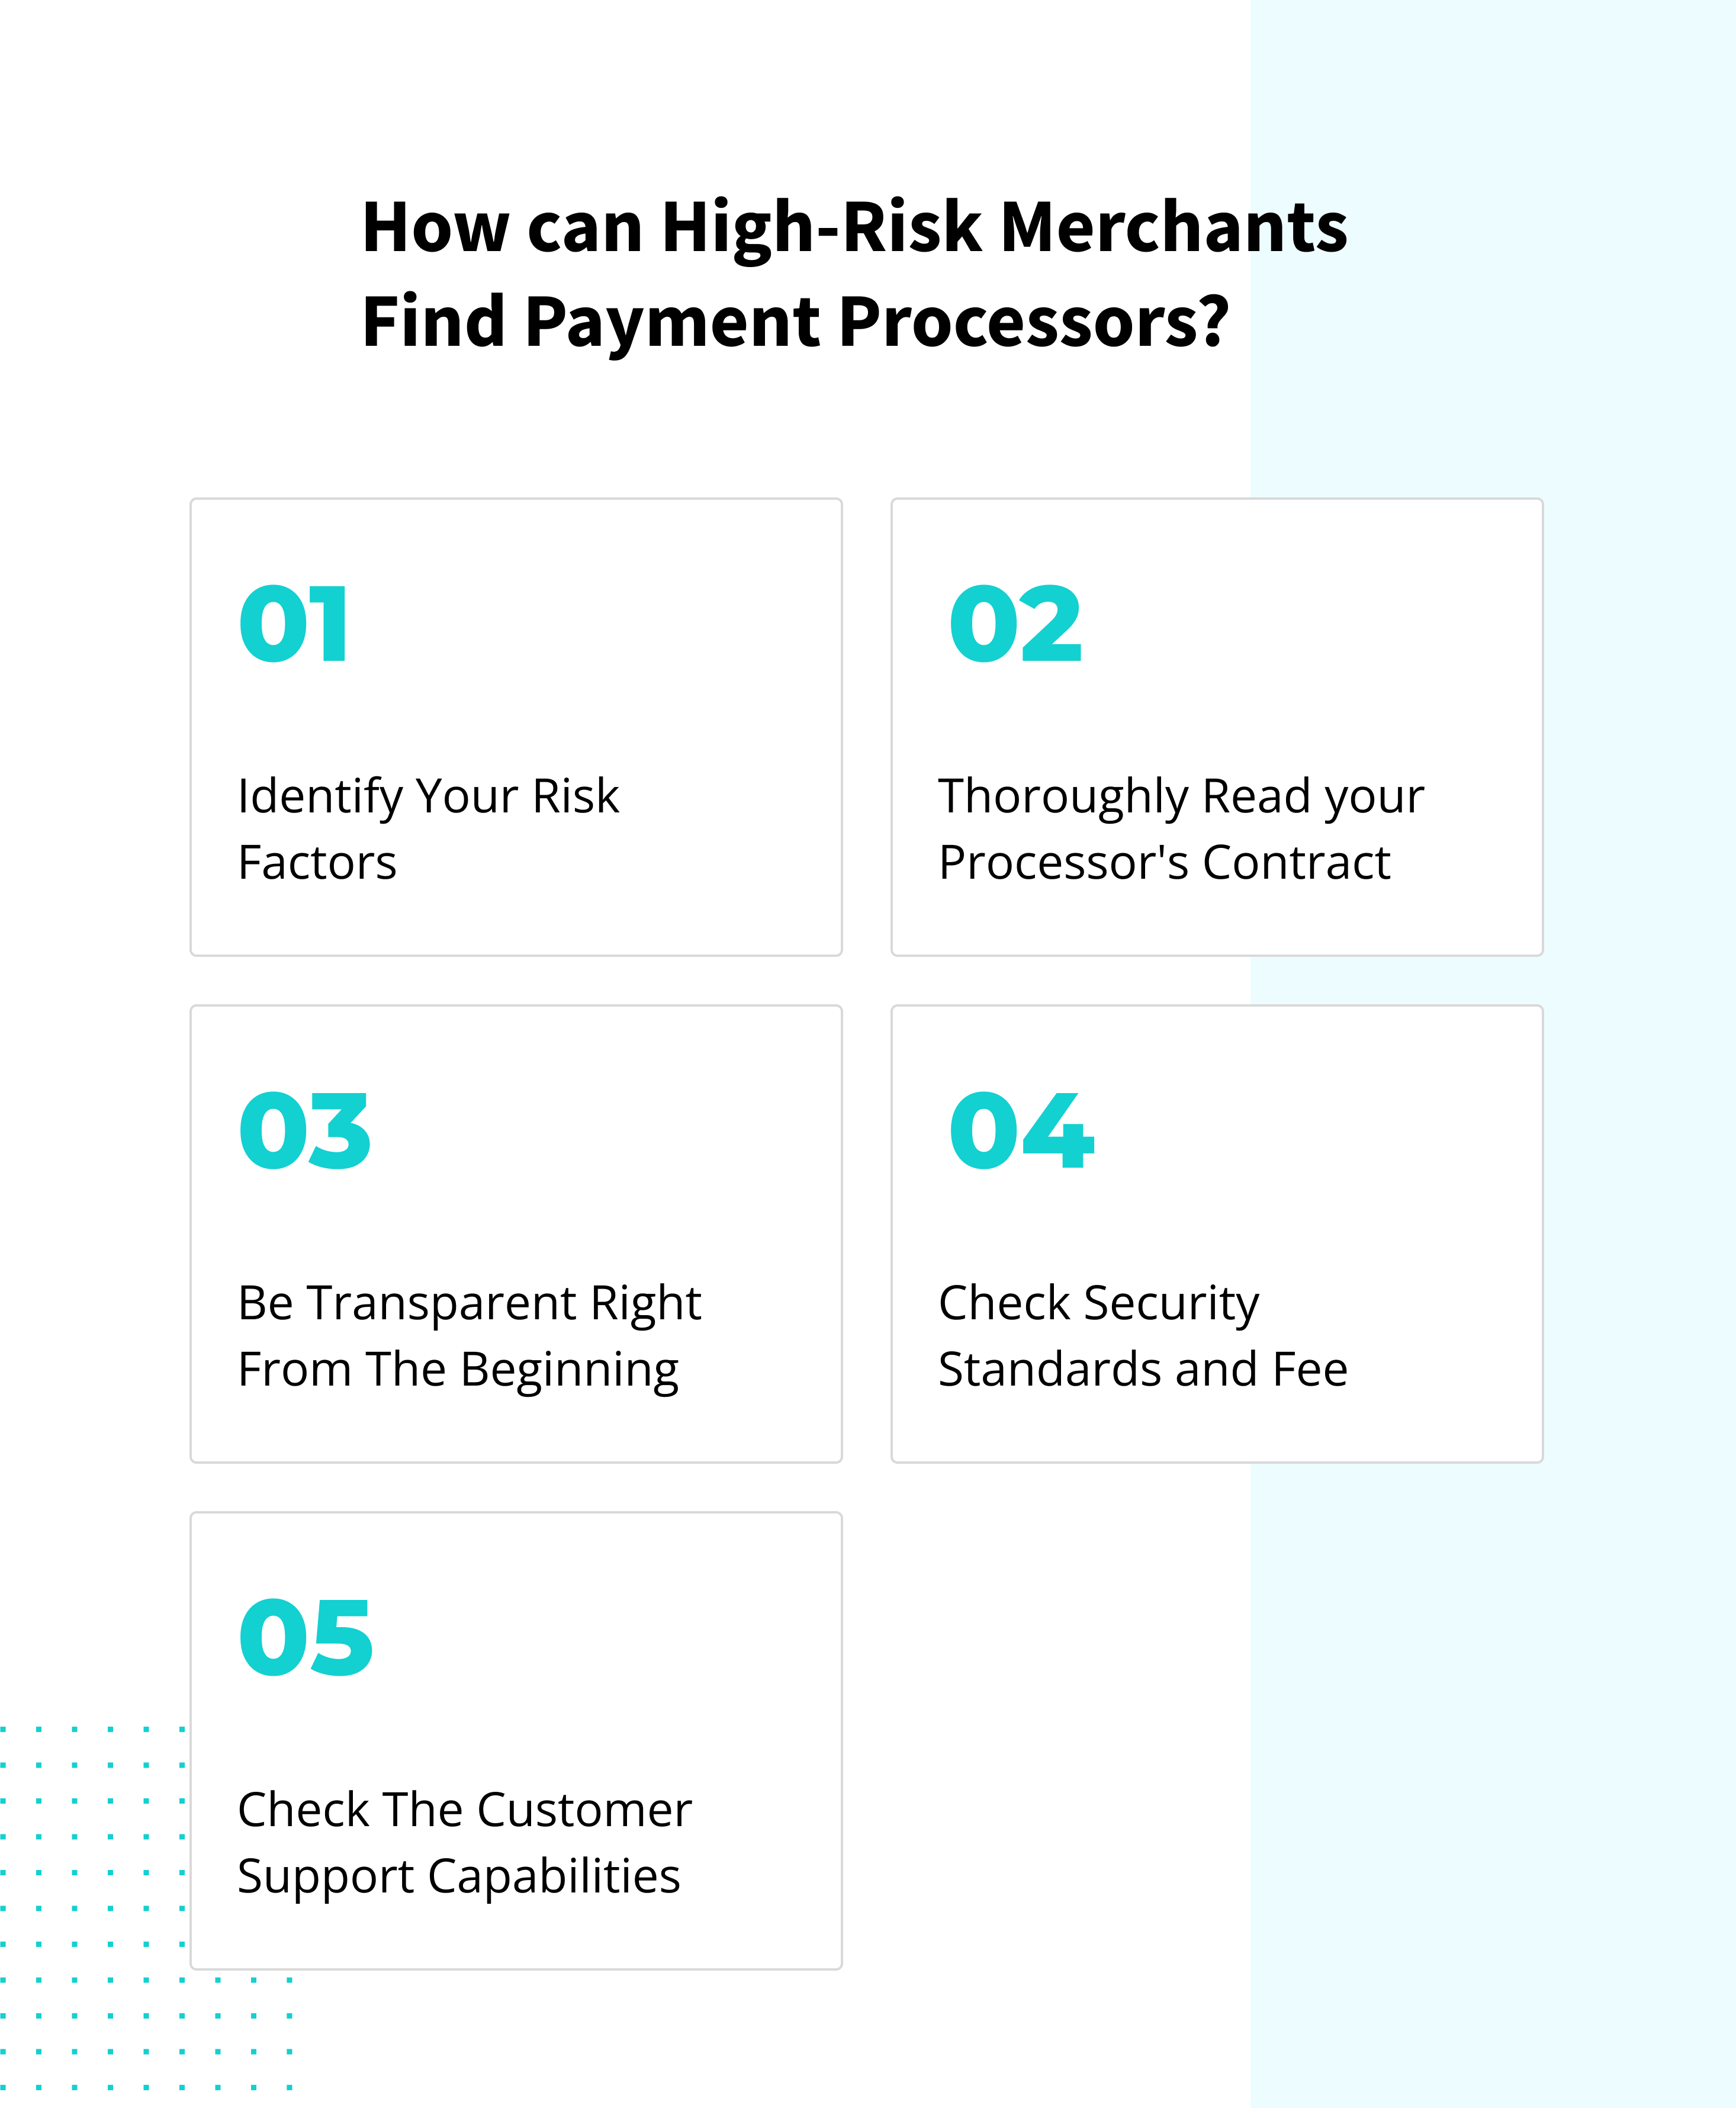 How can High-Risk Merchants Find Payment Processors?